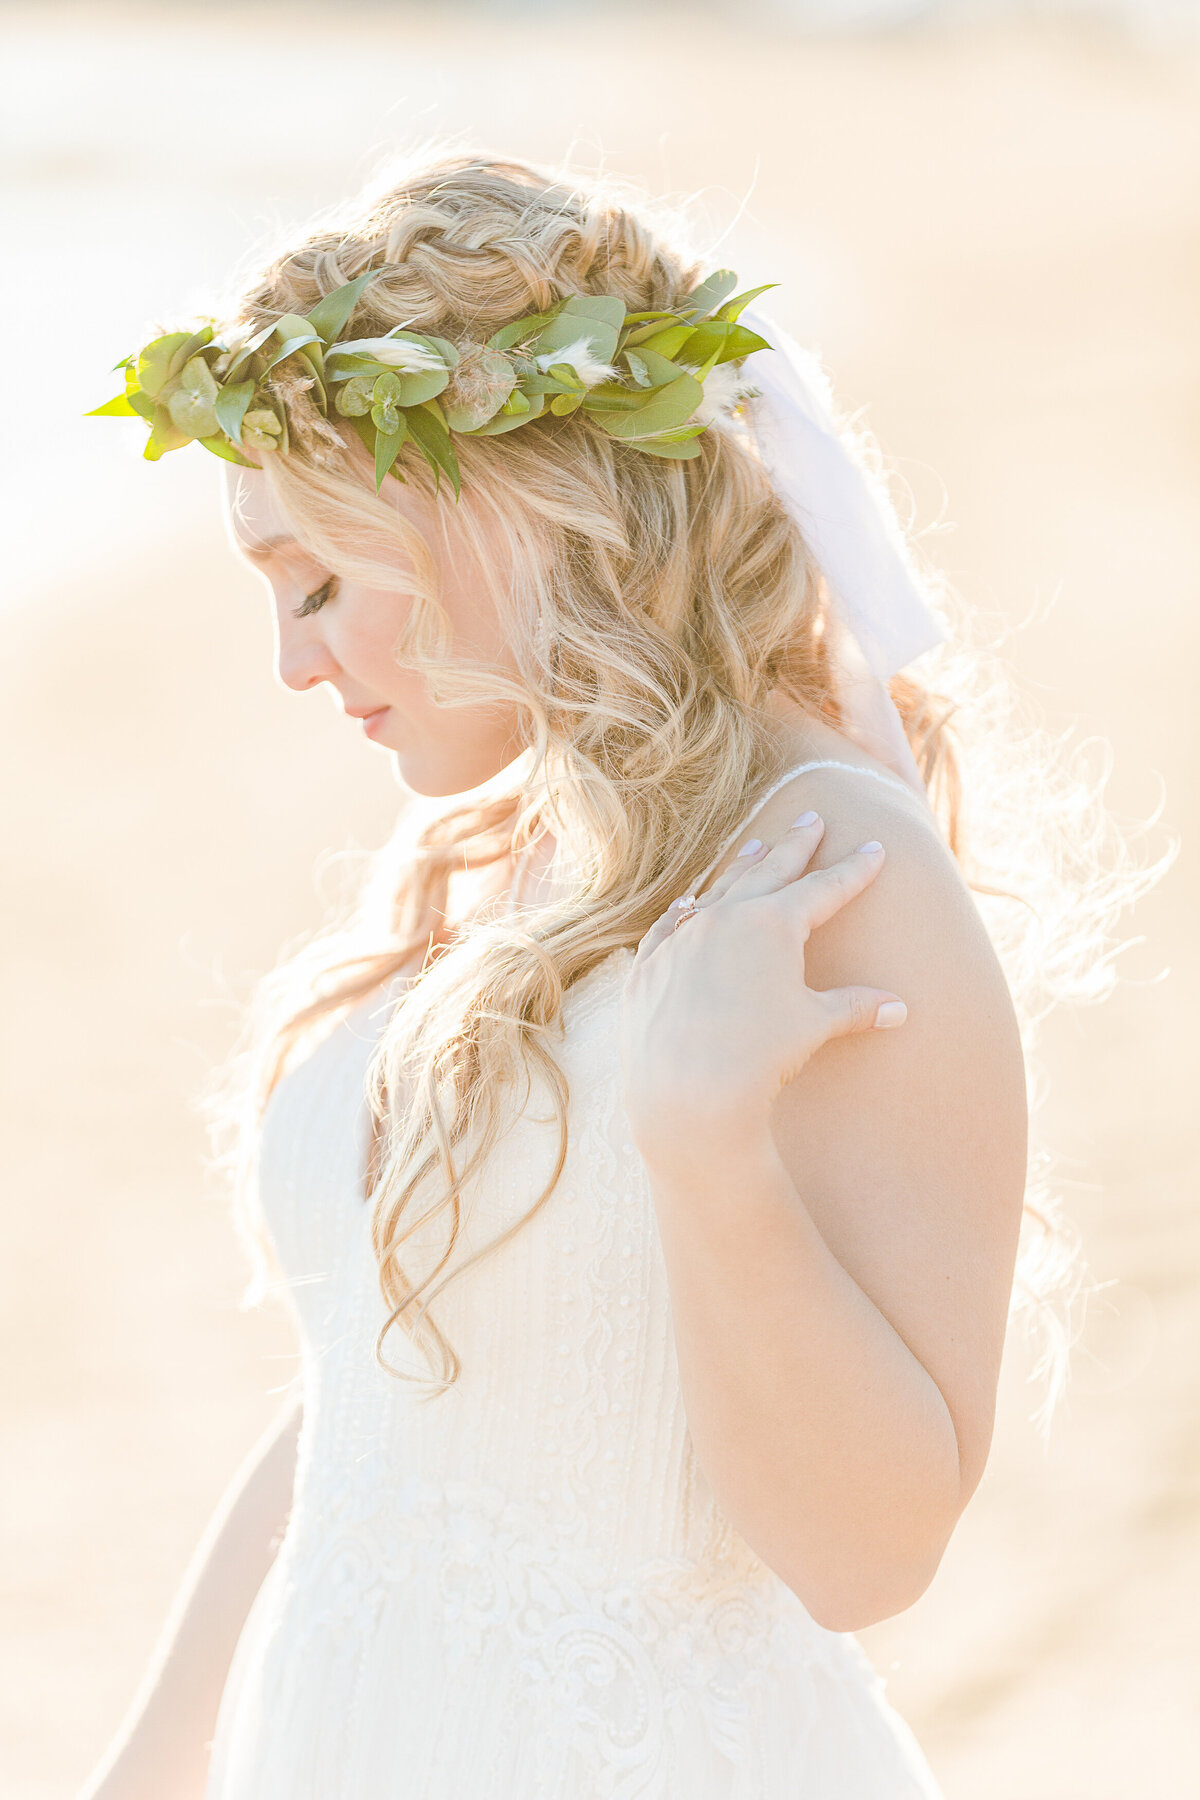 Side profile bridal portrait captured at golden hour. She is looking down and touching her shoulder. Captured at the shoreline of the Madison Beach Hotel in Connecticut by Lia Rose Weddings.